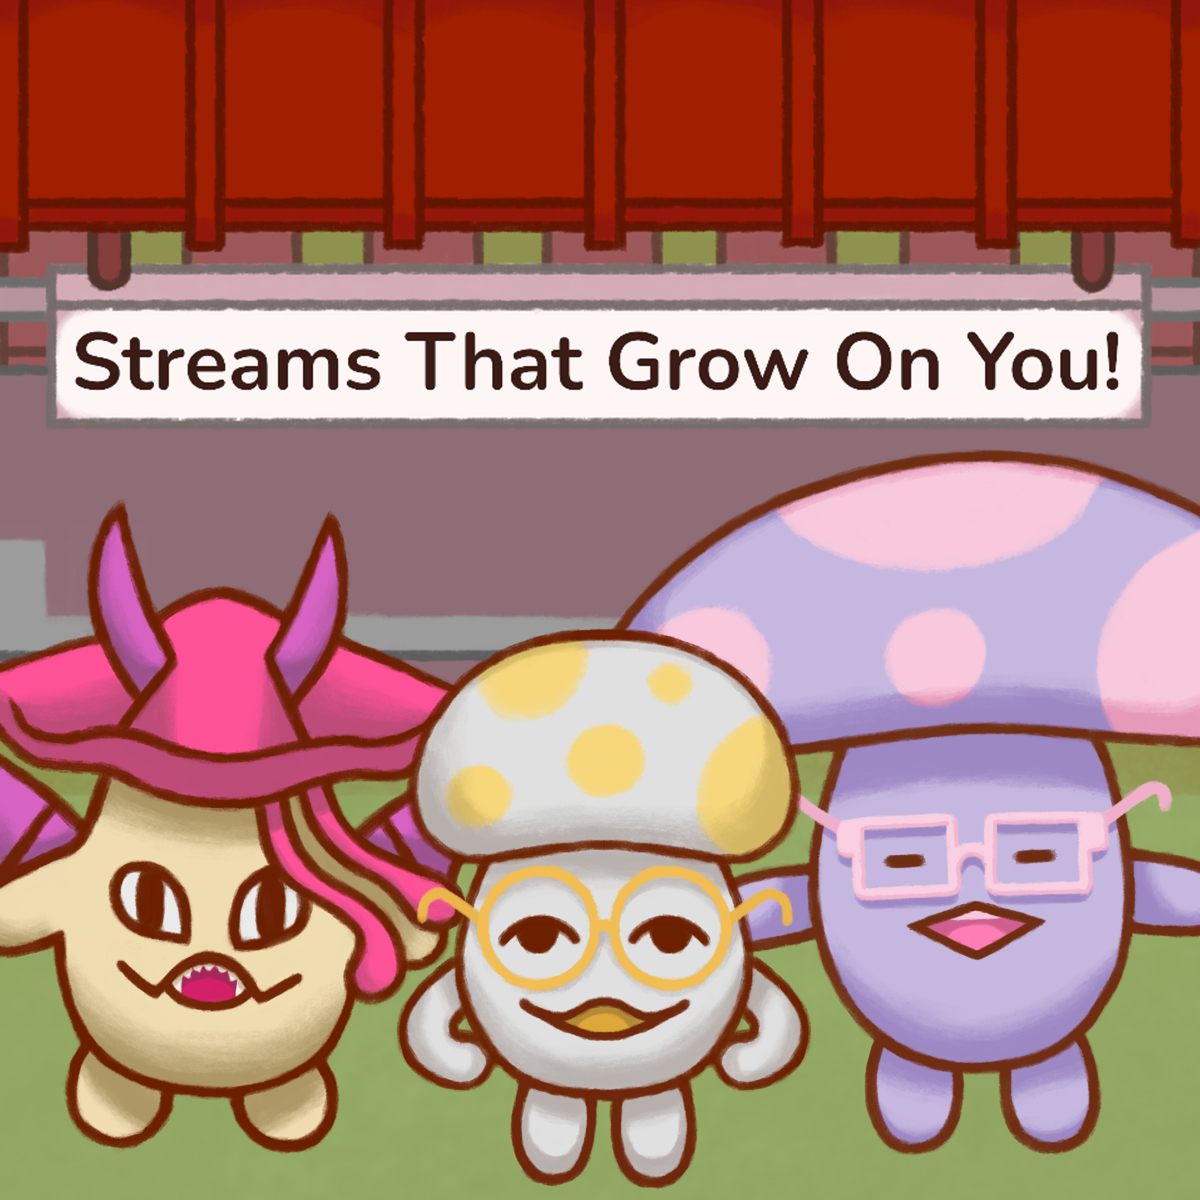 Mushroom Station Streams cover art. Standing in front of the Mushroom Station are the three Mushroomites representing Jupiter Morningstar, Amy Terry, and Joe Langlois. They are excited to stream for you!